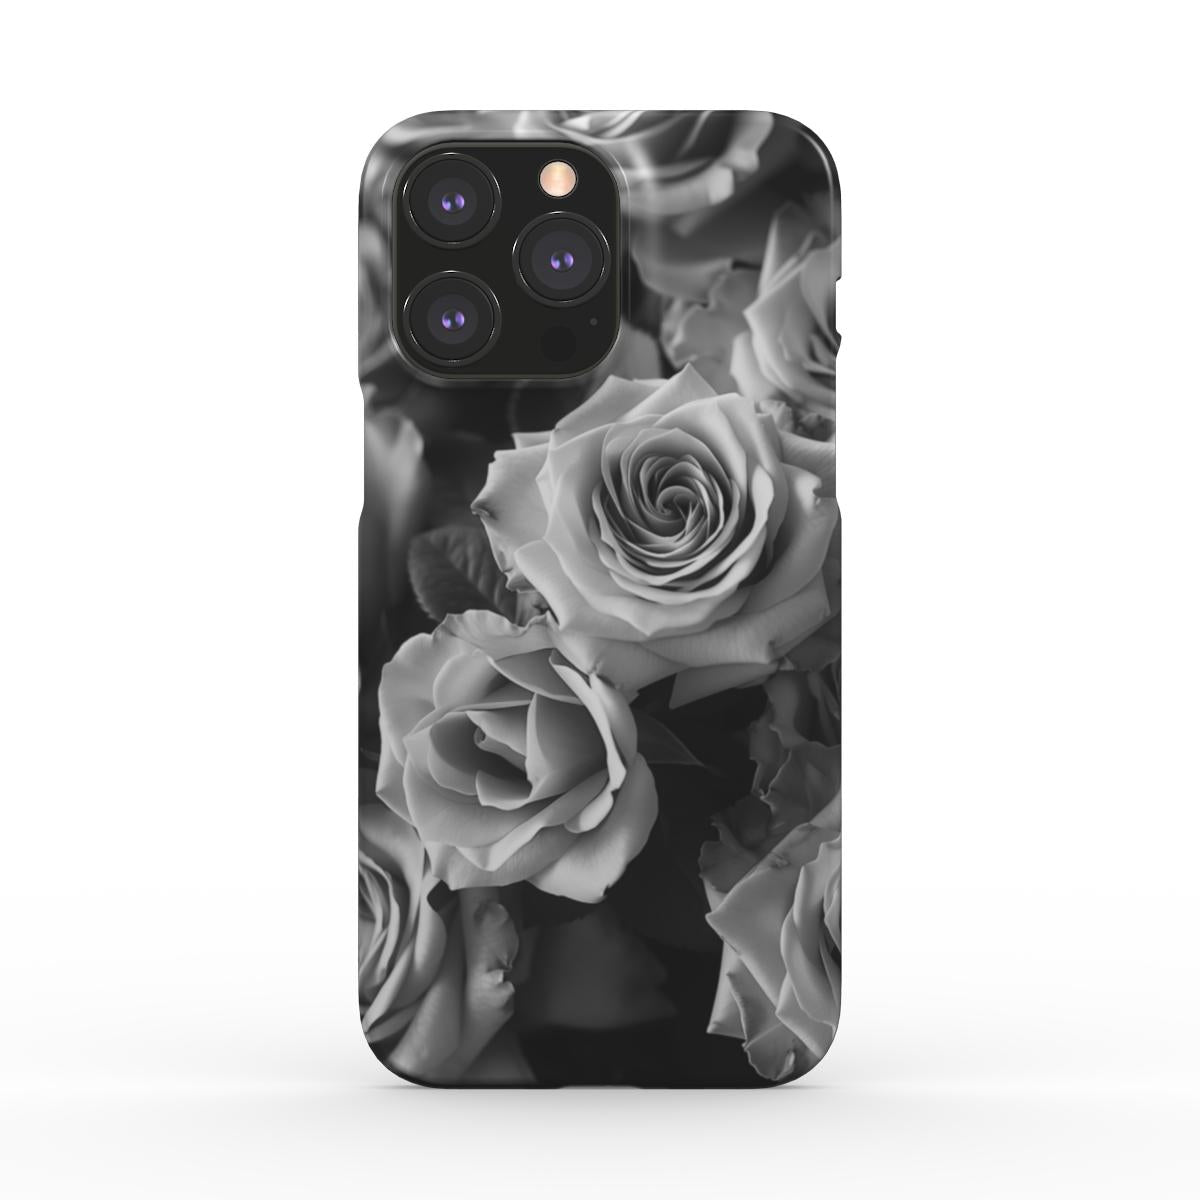 Elegance in Monochrome: The Timeless Rose Snap Phone Case